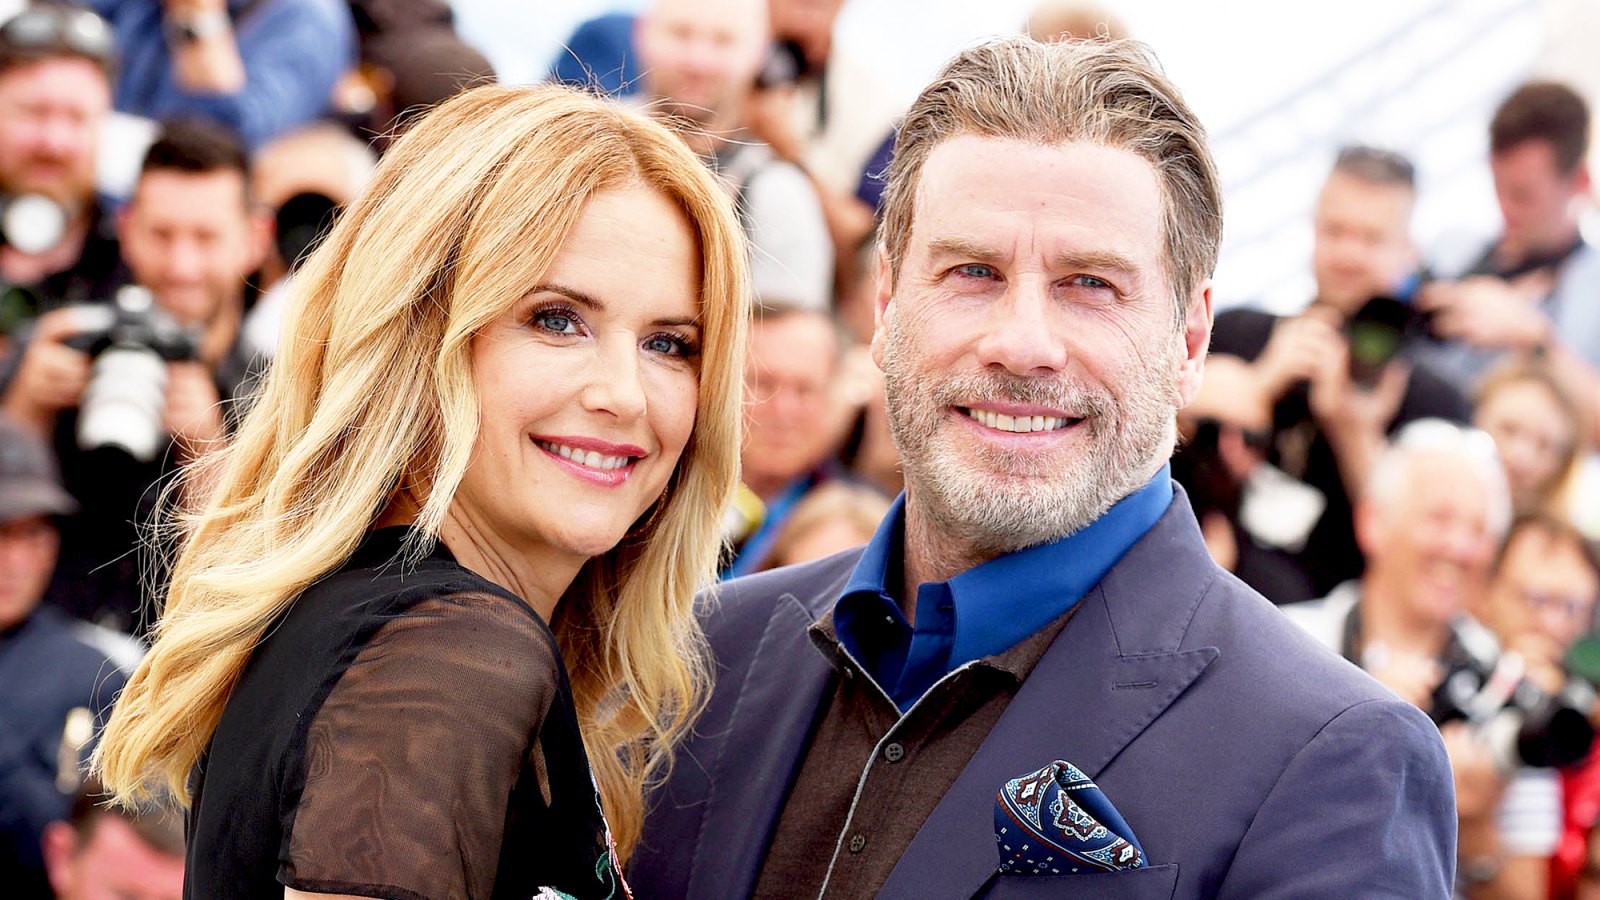 Kelly Preston and John Travolta attend the 71st annual Cannes Film Festival in France on May 15, 2018.